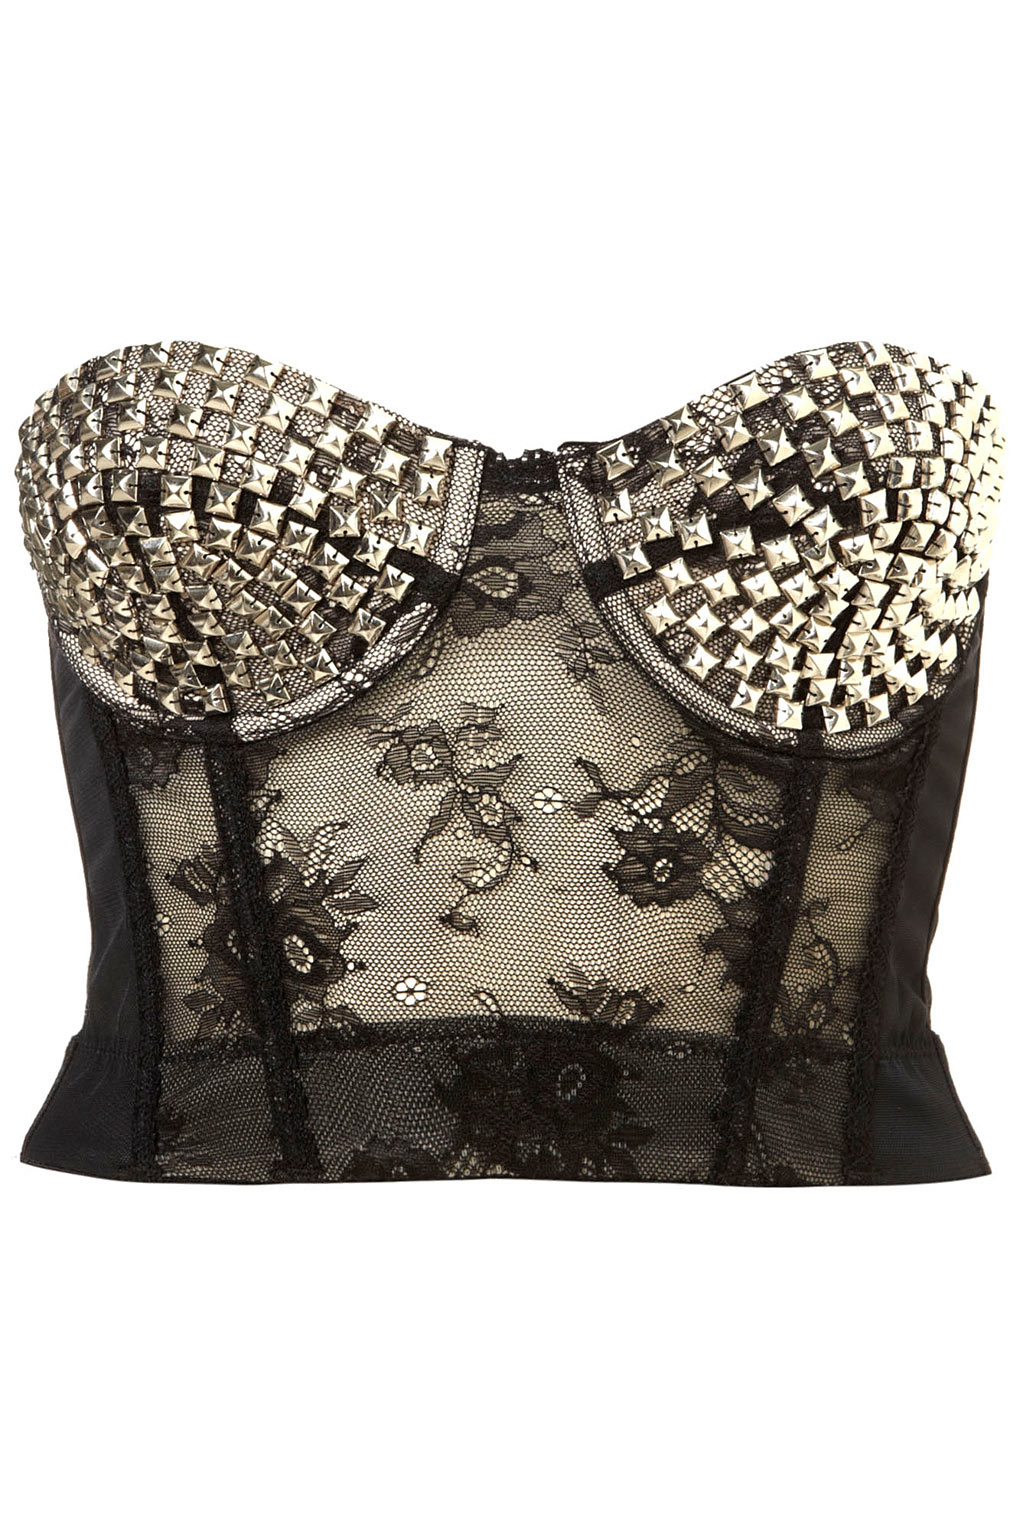 Lyst - Topshop Studded Cup Lace Bralet in Black